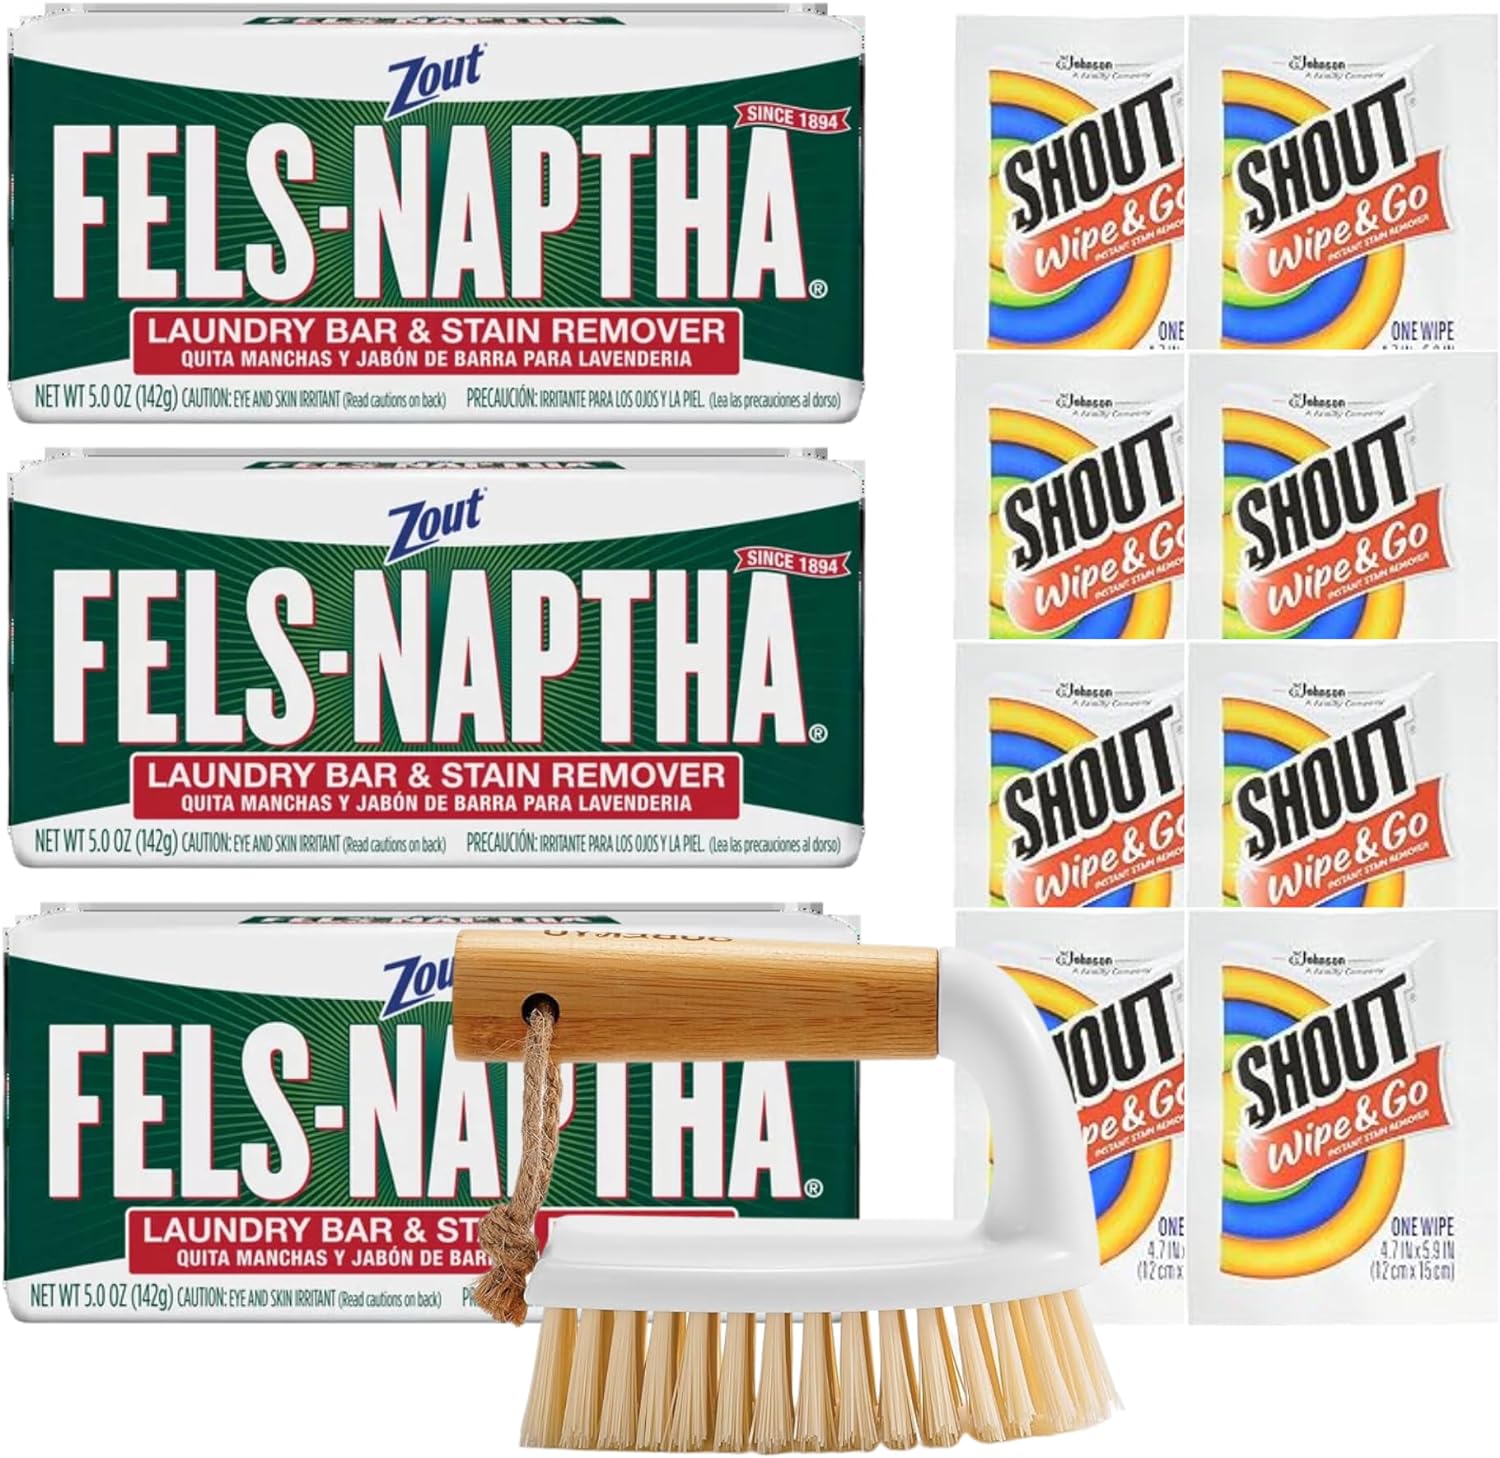 Fels-Naptha Laundry Detergent Bar Soap and Stain Remover Bundle - Includes 3 (5-ounce) Fels Naptha Laundry Bar, 8 Shout Wipes, Eco Bamboo Scrub Brush, DIY Detergent Recipe by Foxtail Collective